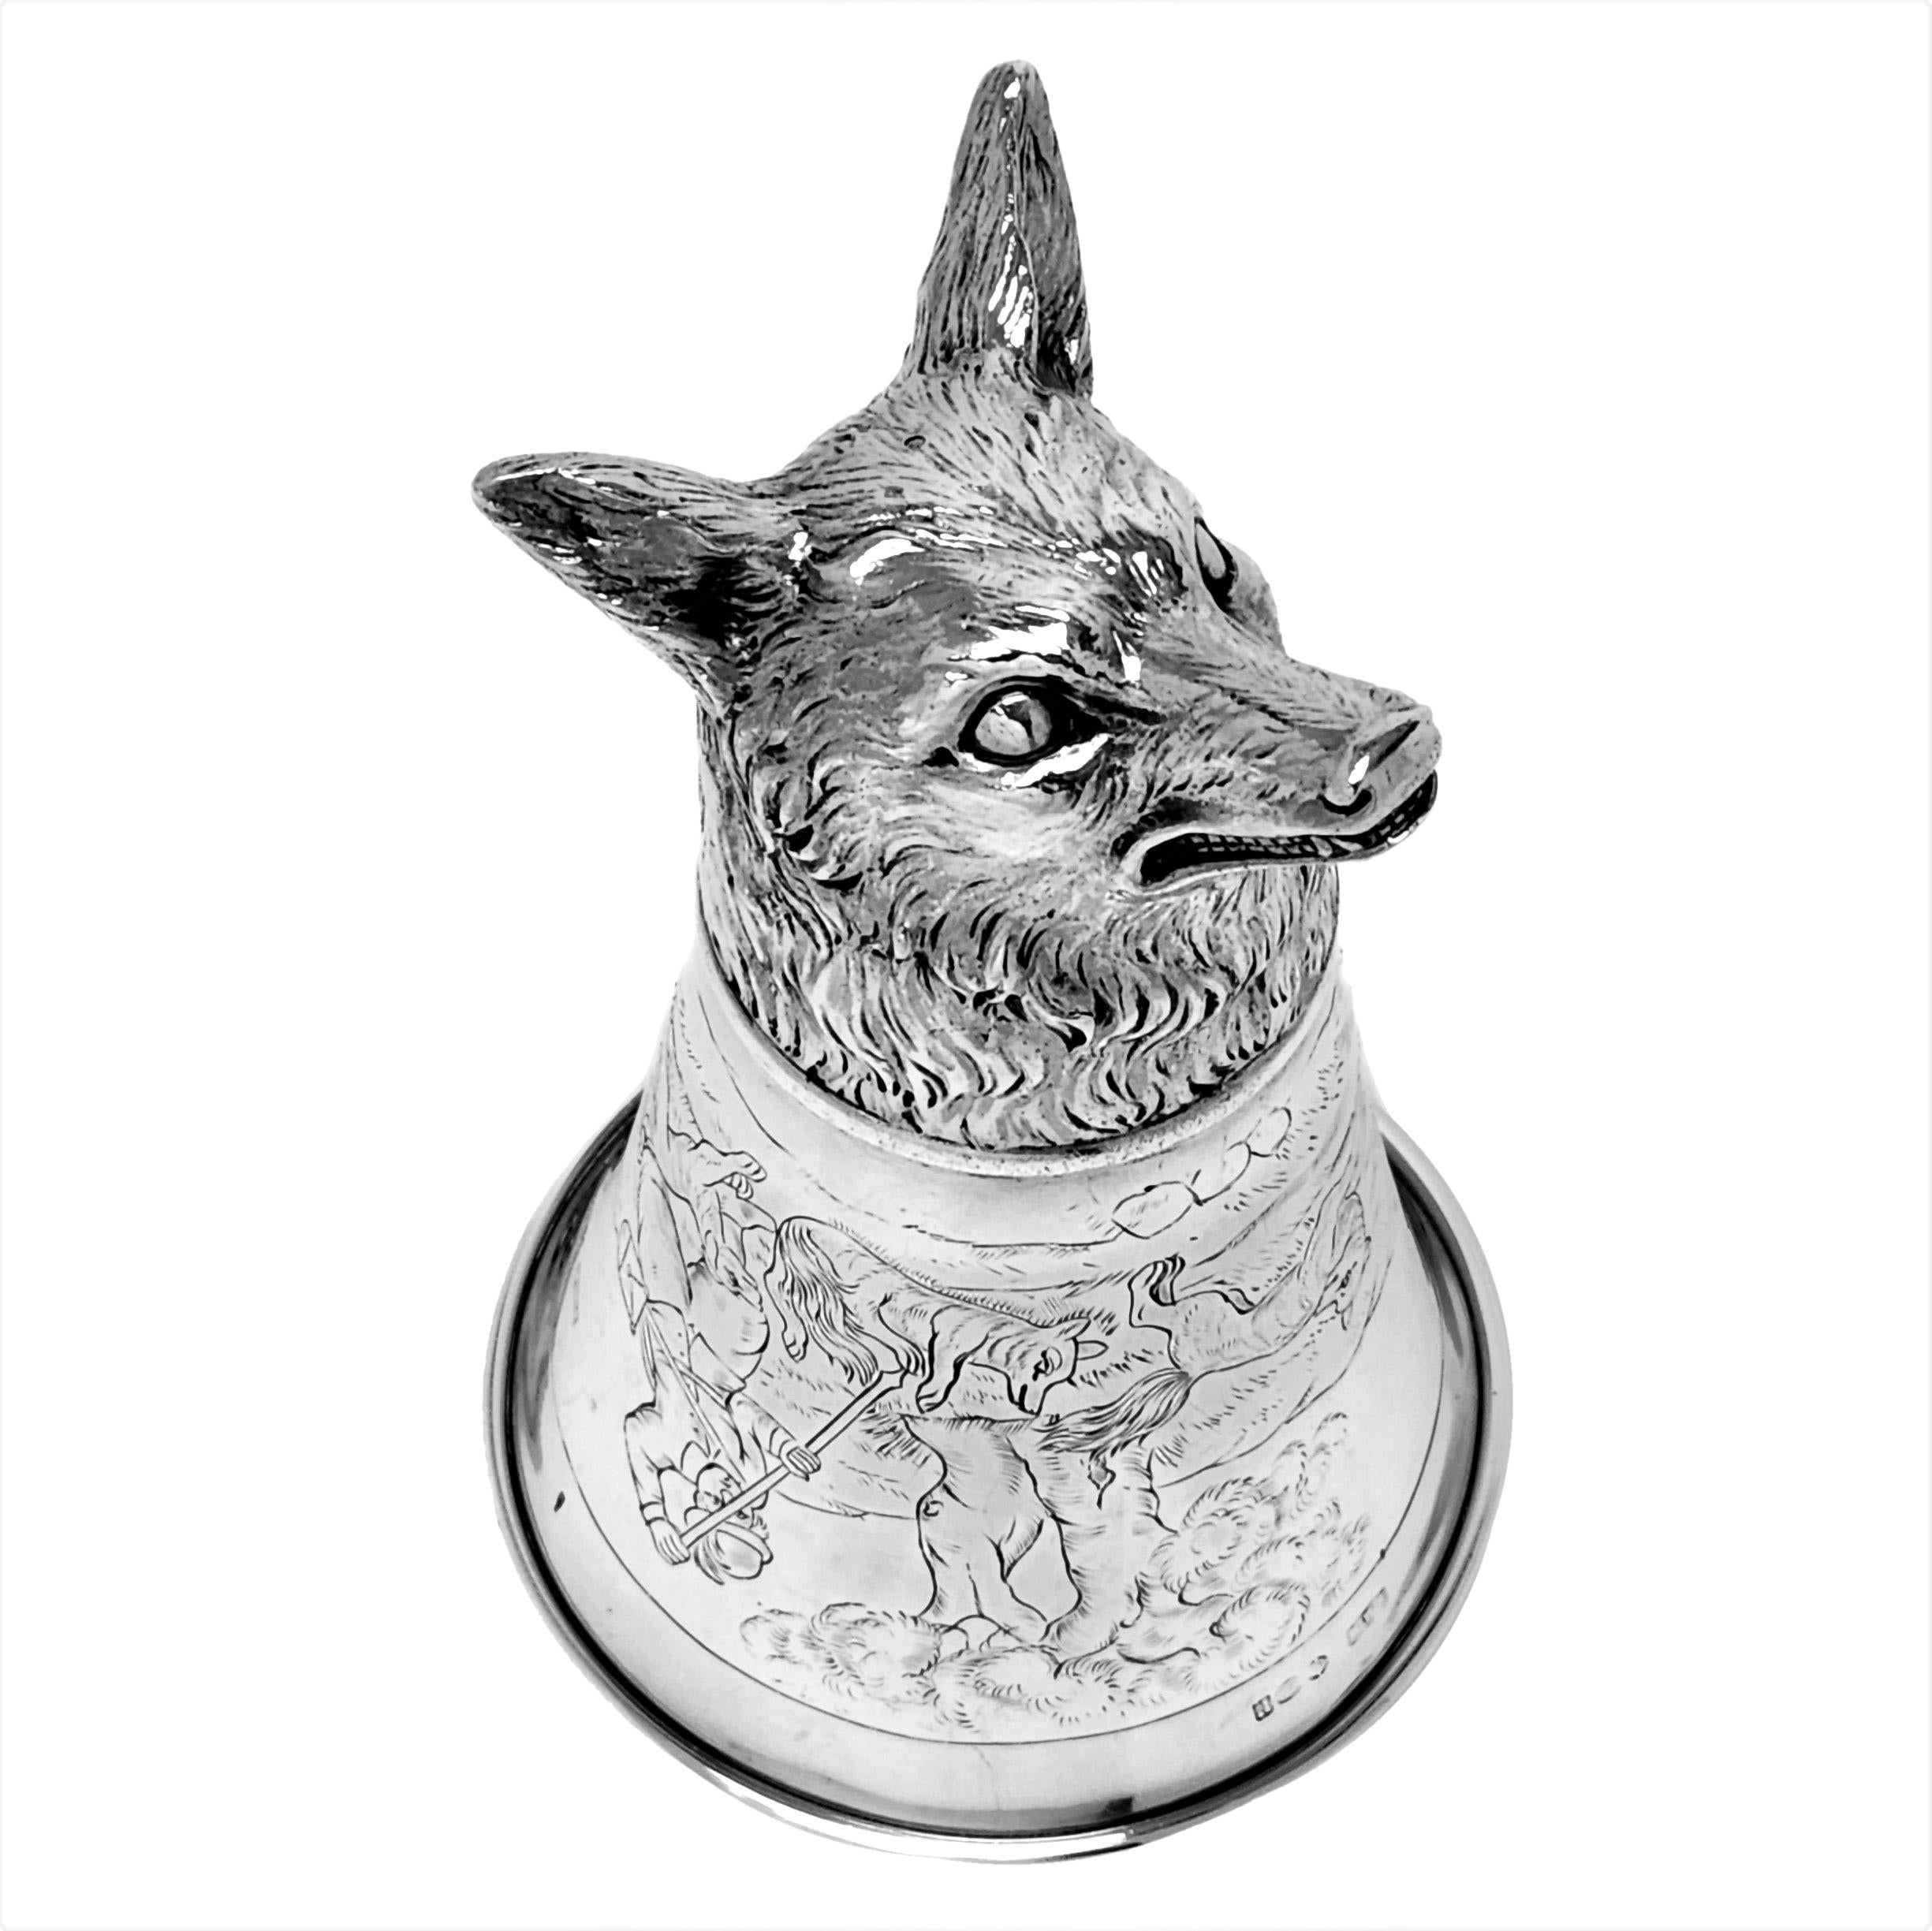 A magnificent Antique Silver Stirrup Cup with a Fox head and a fox hunting design engraved on the body. Made in the German historismus style. 

Made in Germany by Berthold Muller and imported in to England in 1912.

Measures: approx. weight -